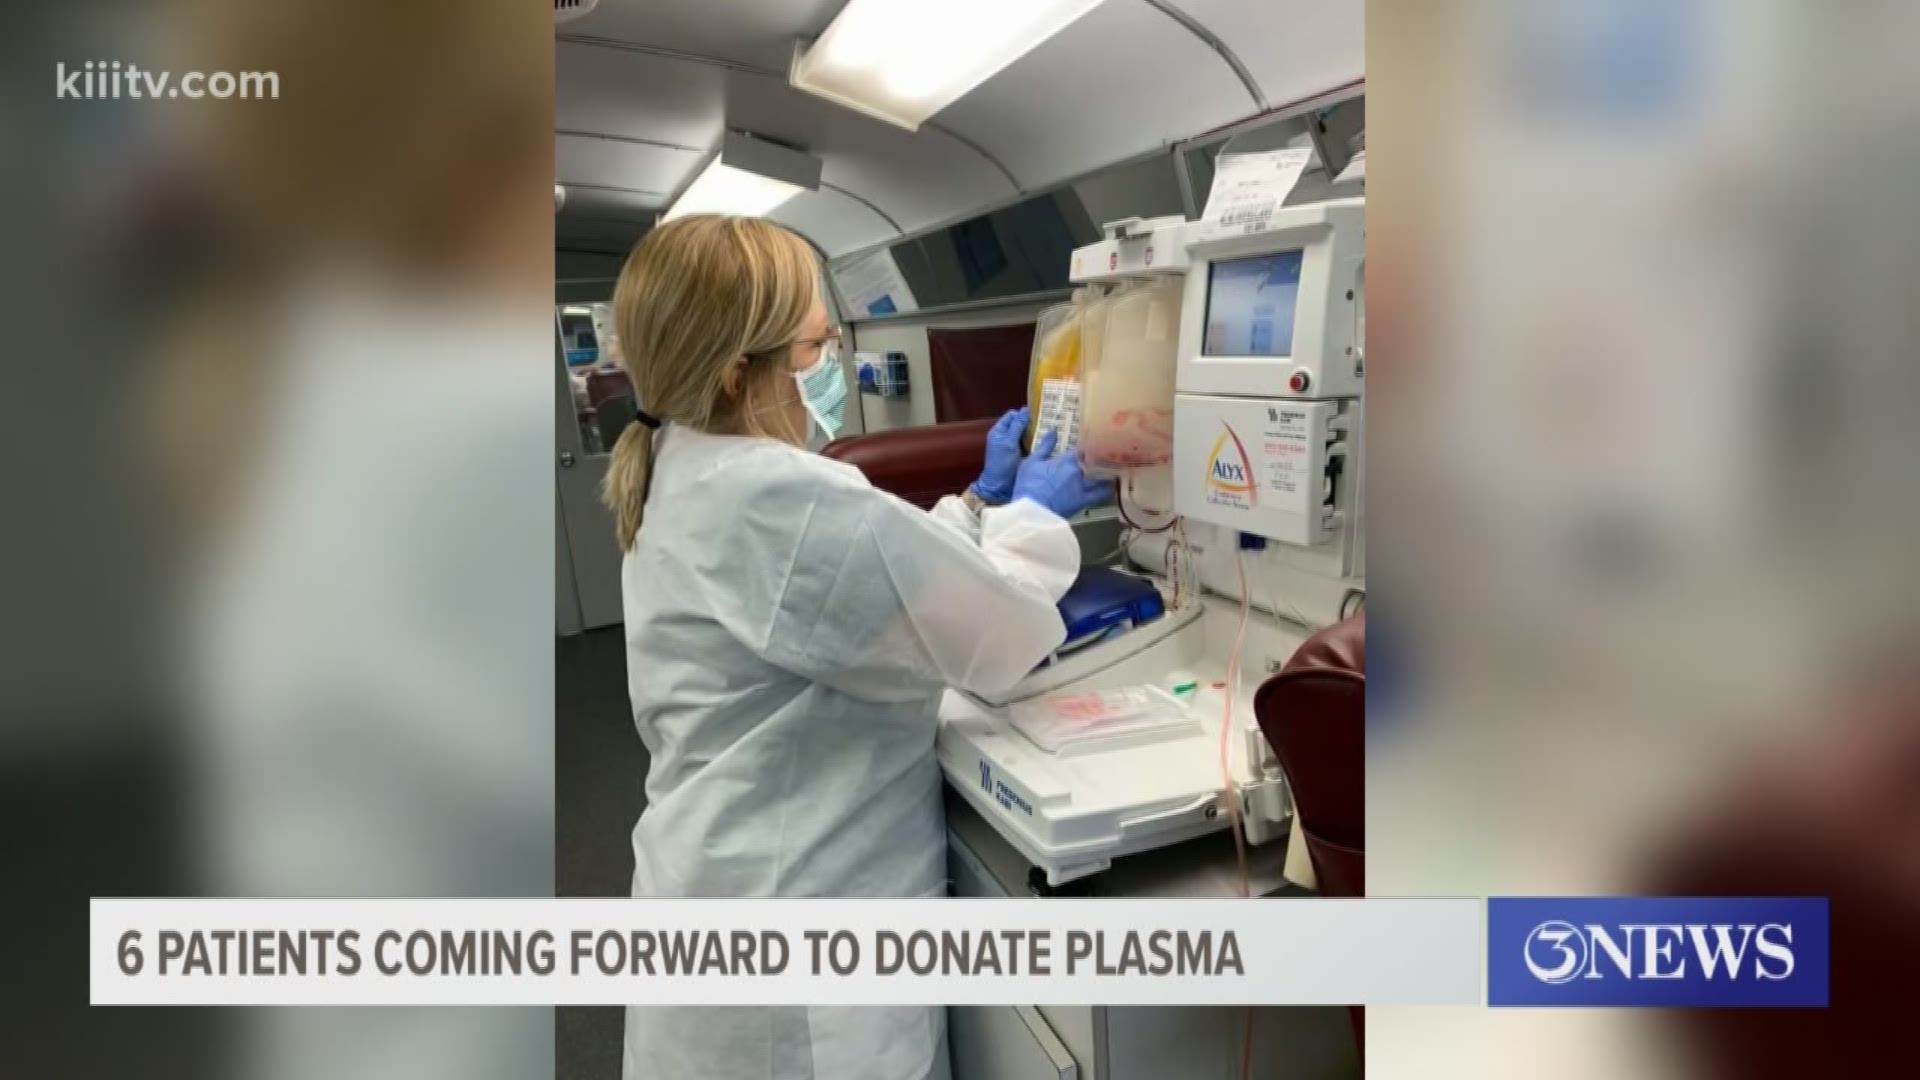 6 recovered patients are set to test tomorrow for qualification to donate their plasma.